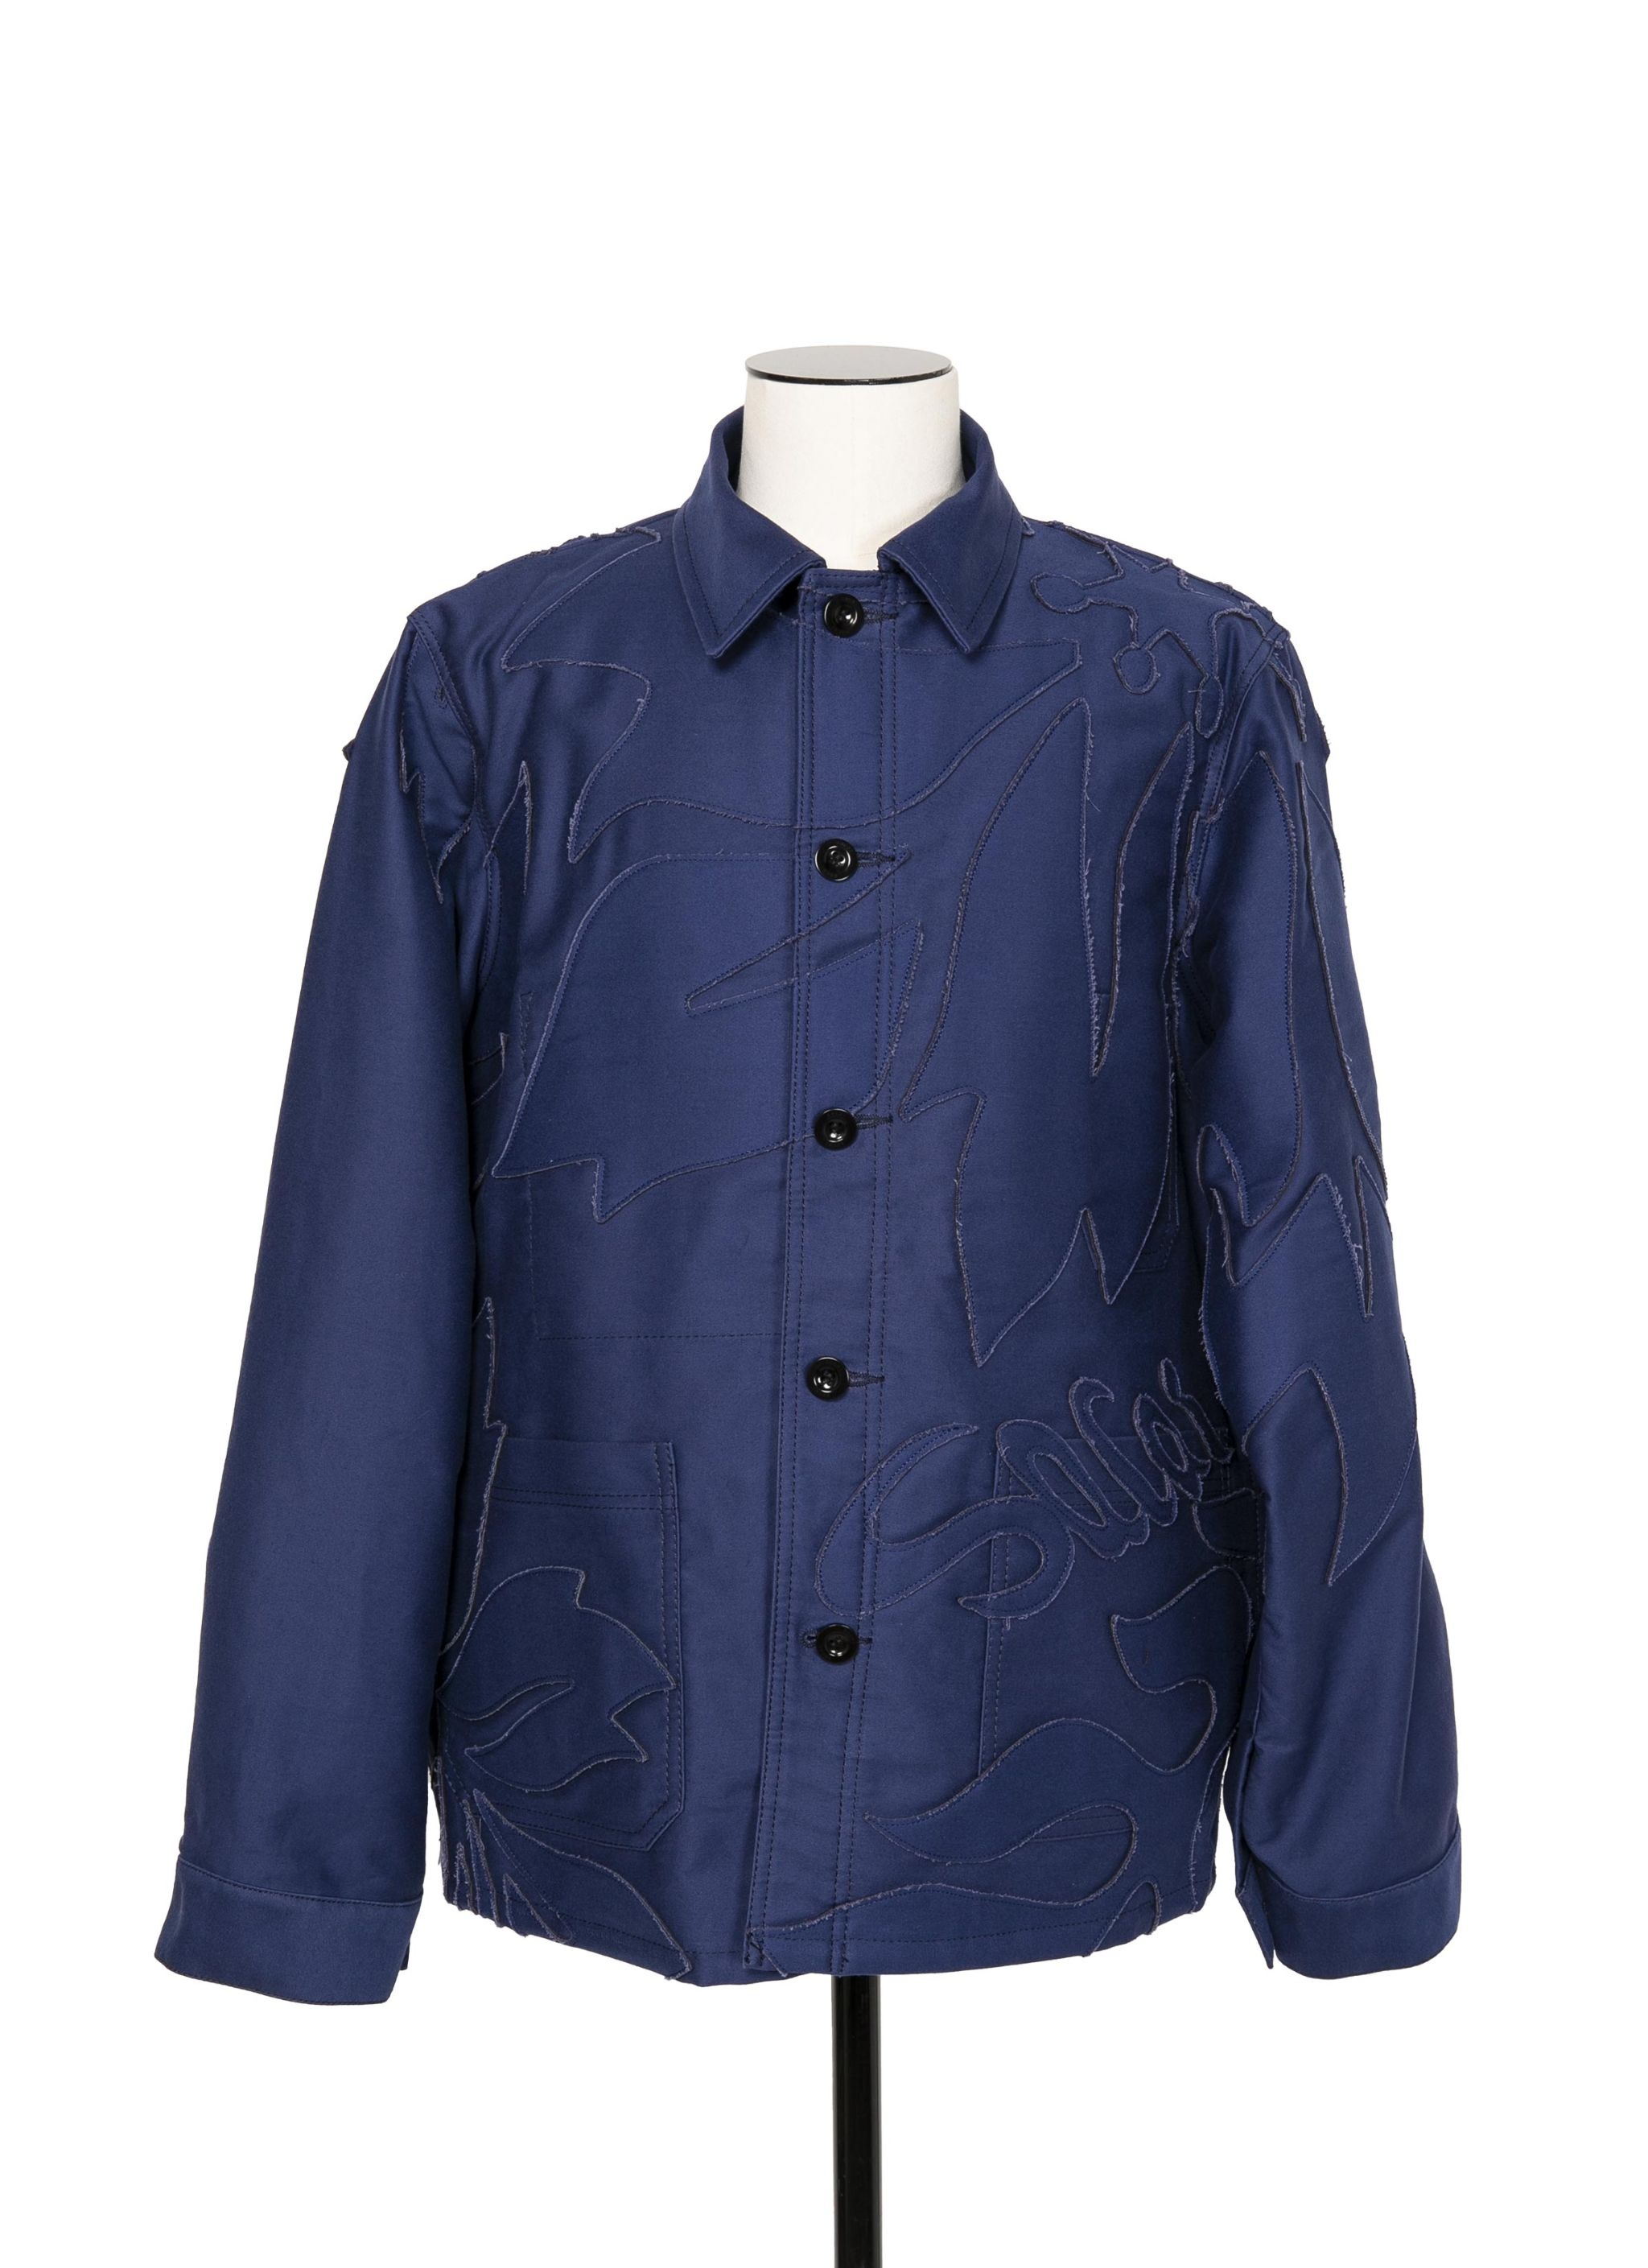 Moleskin Embroidered Patch Jacket - 1